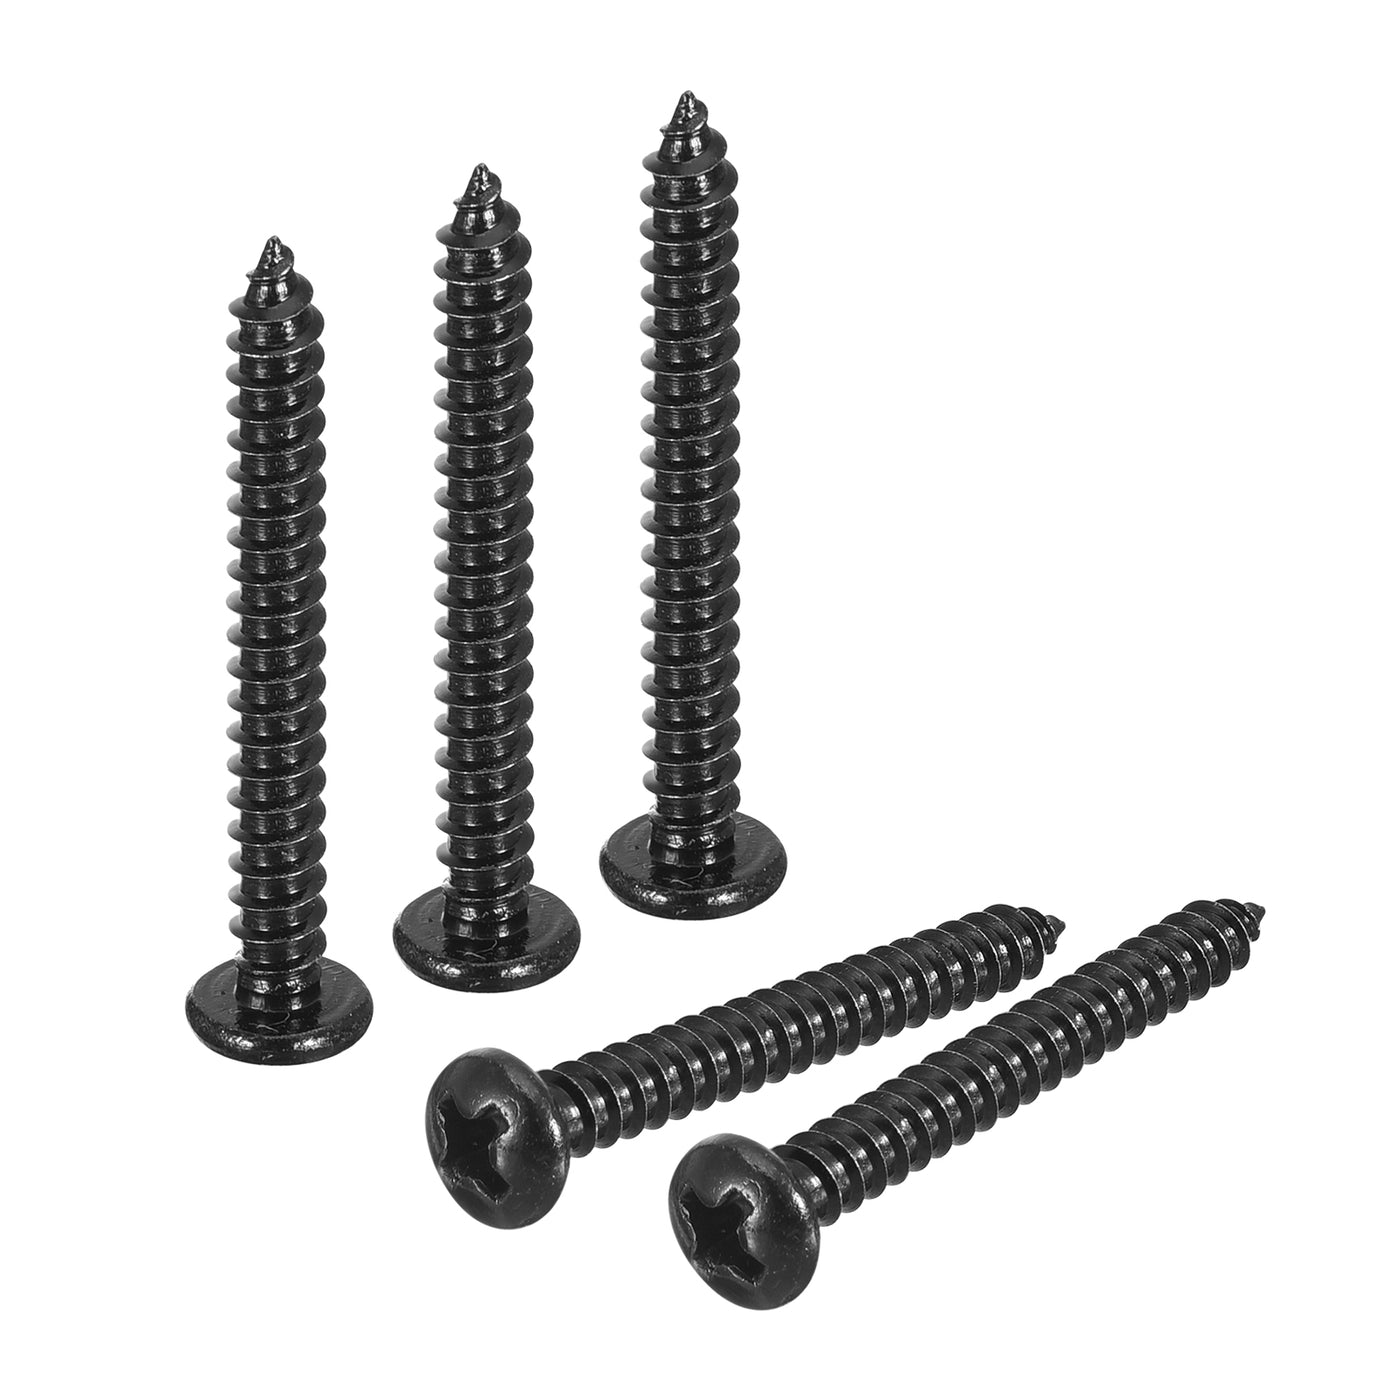 uxcell Uxcell #6 x 1-3/16" Phillips Pan Head Self-tapping Screw, 100pcs - 304 Stainless Steel Round Head Wood Screw Full Thread (Black)